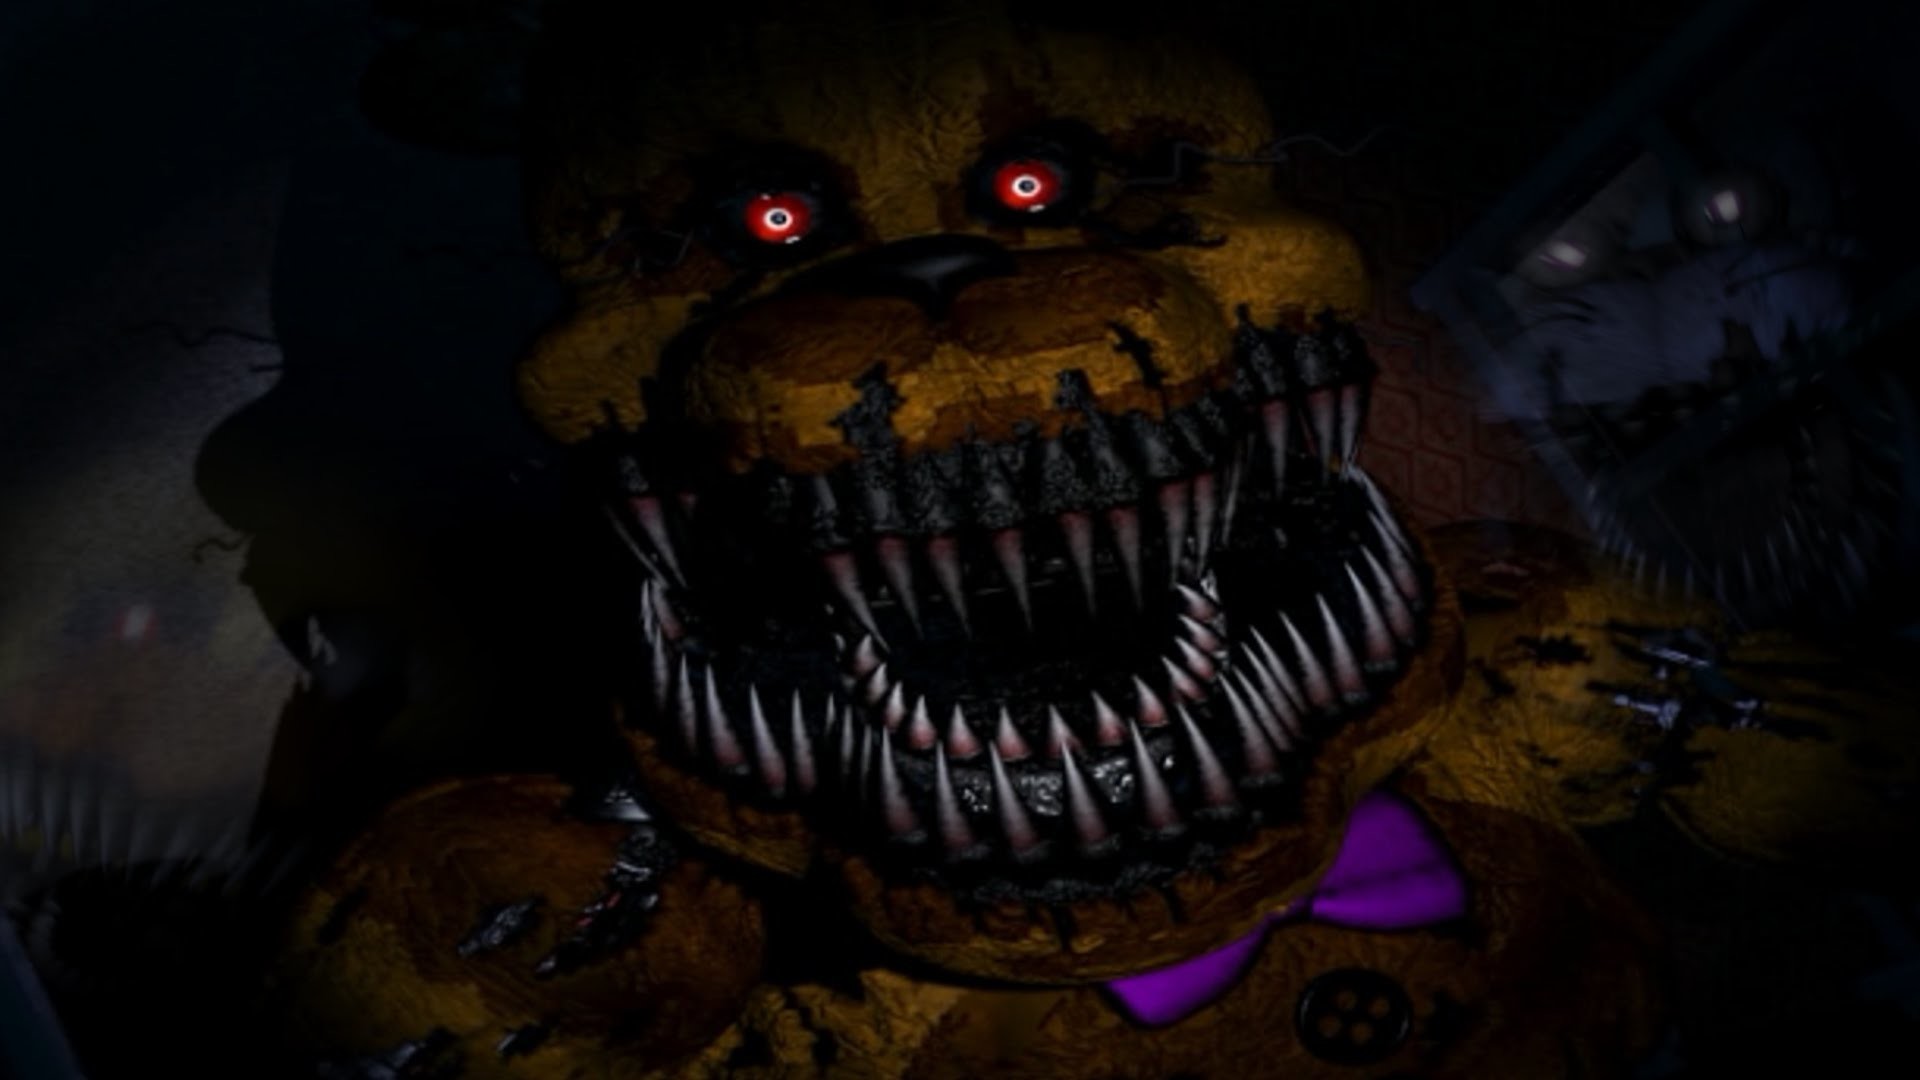 Five Nights at Freddy's 4 #5: GOLDEN FREDDY & The Bite of 87!